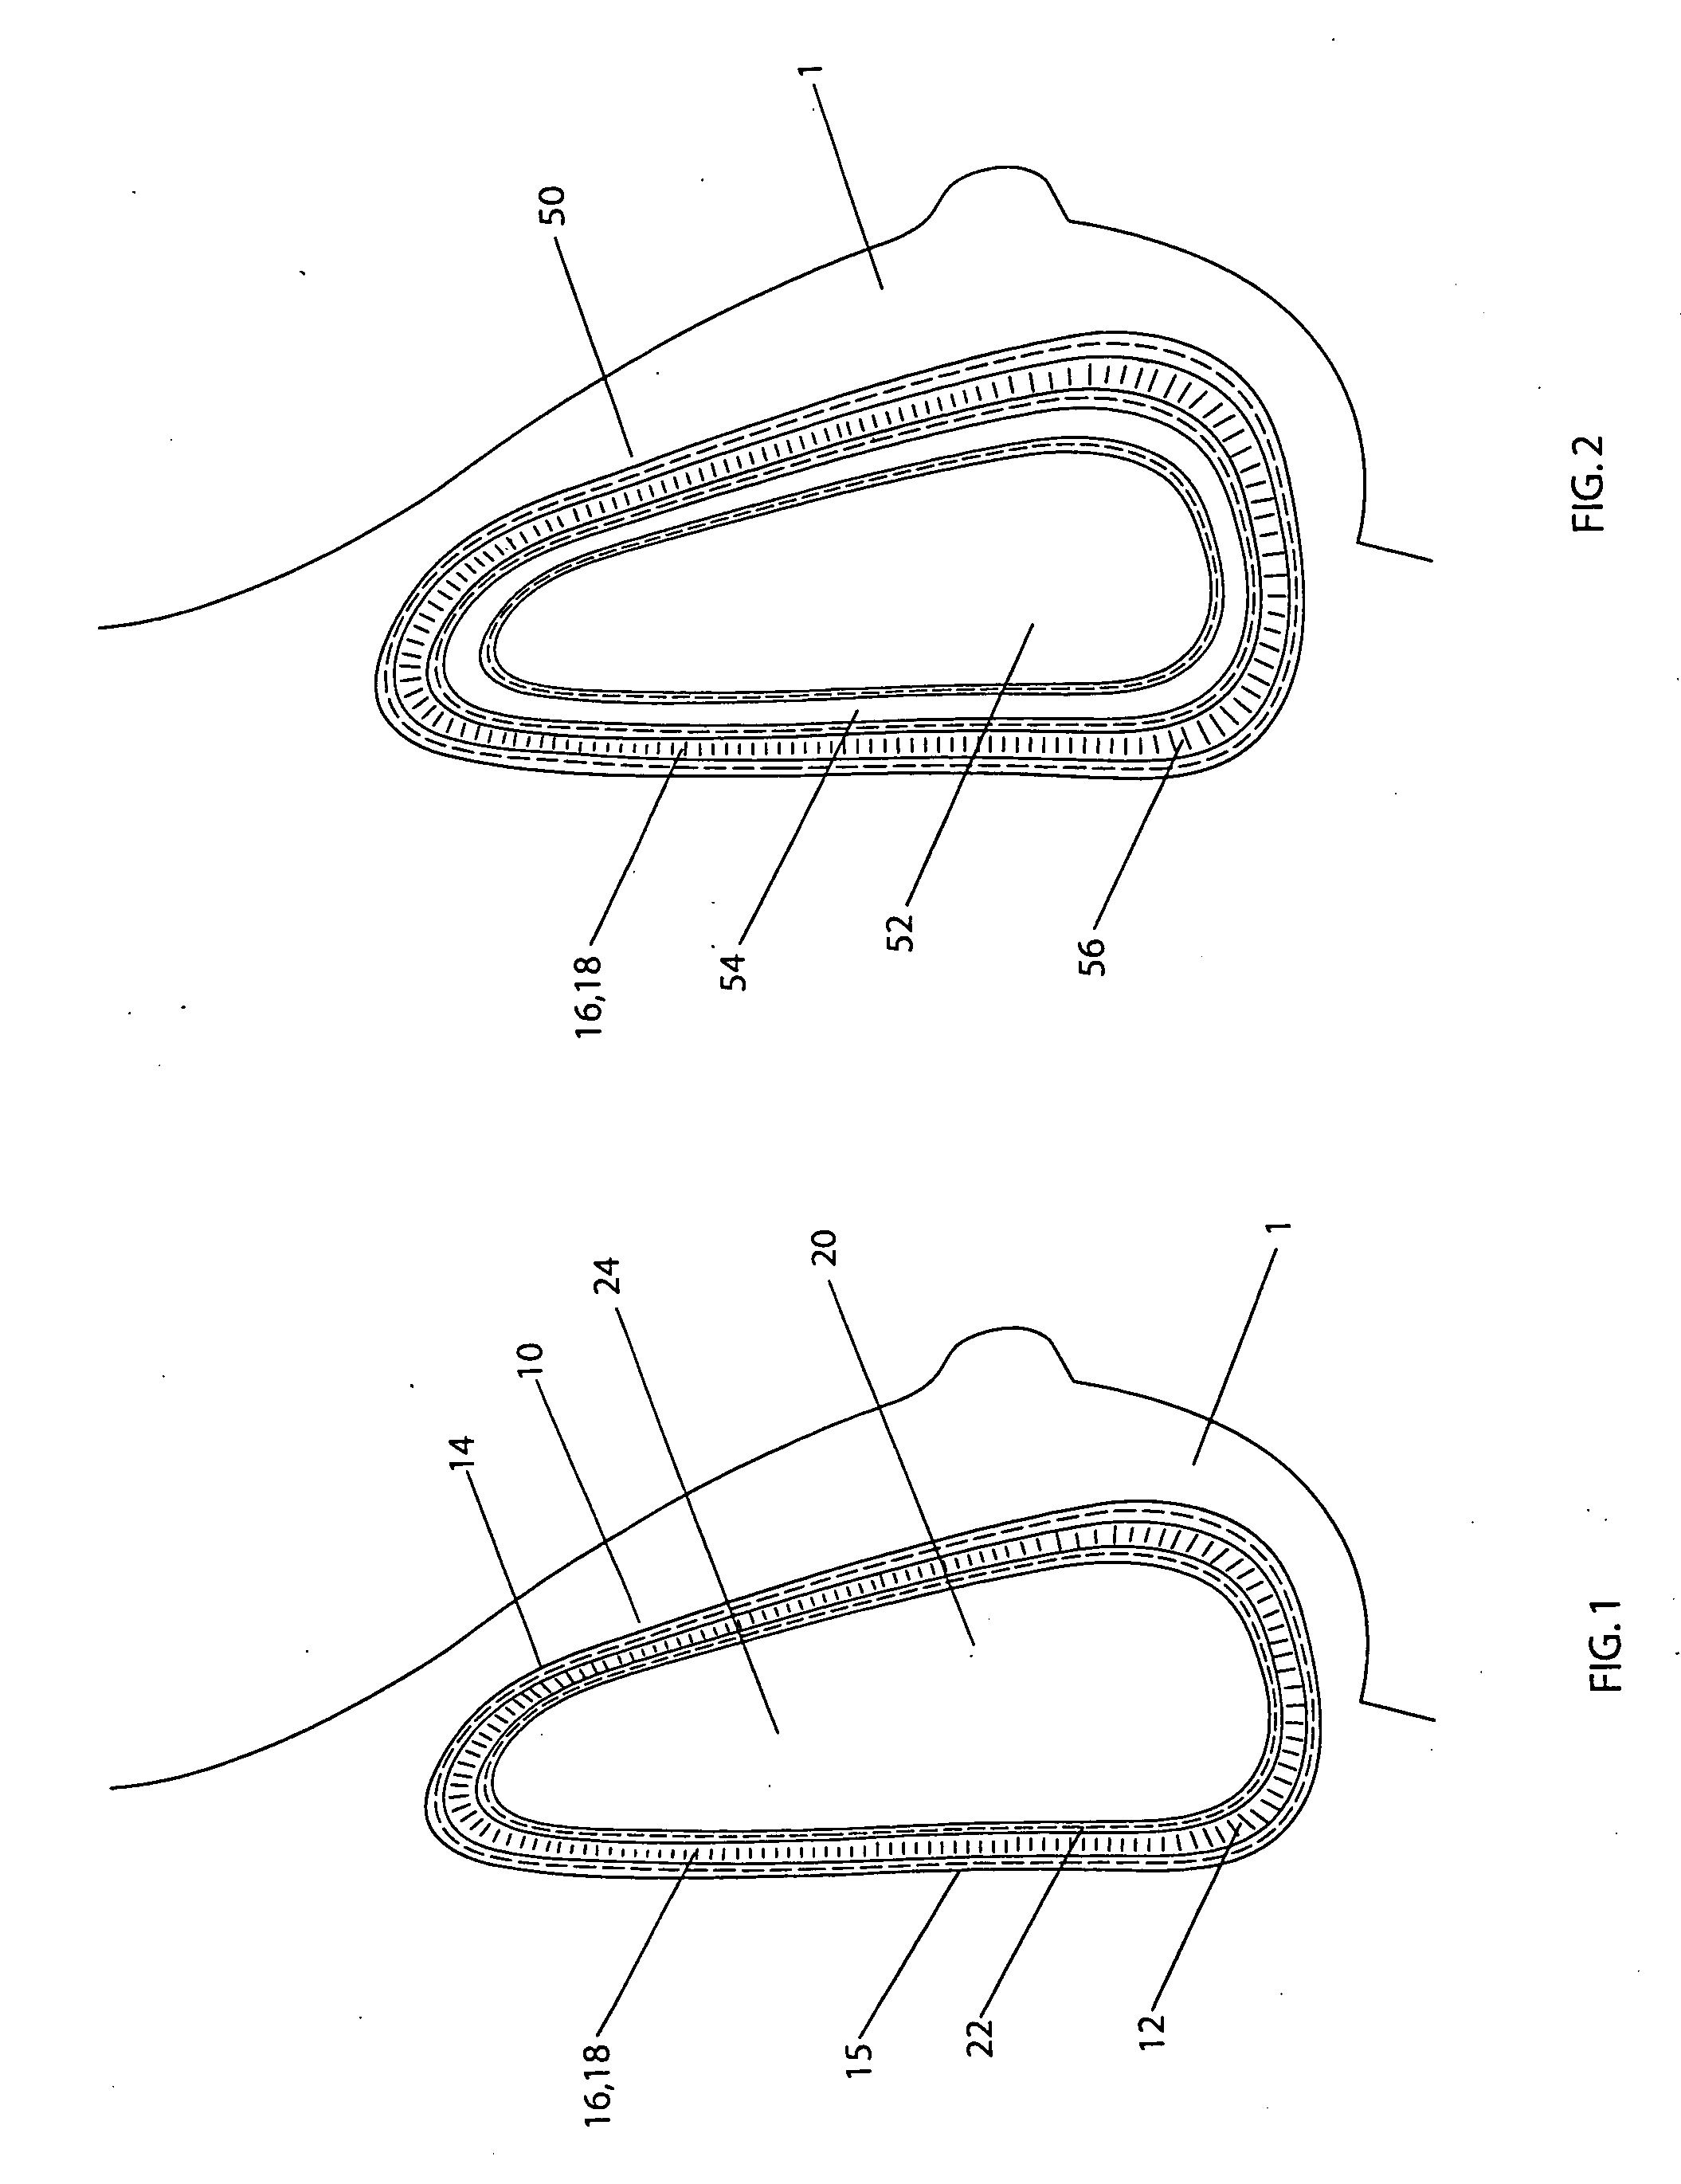 Cosmetic and reconstructive prosthesis containing a biologically compatible rupture indicator